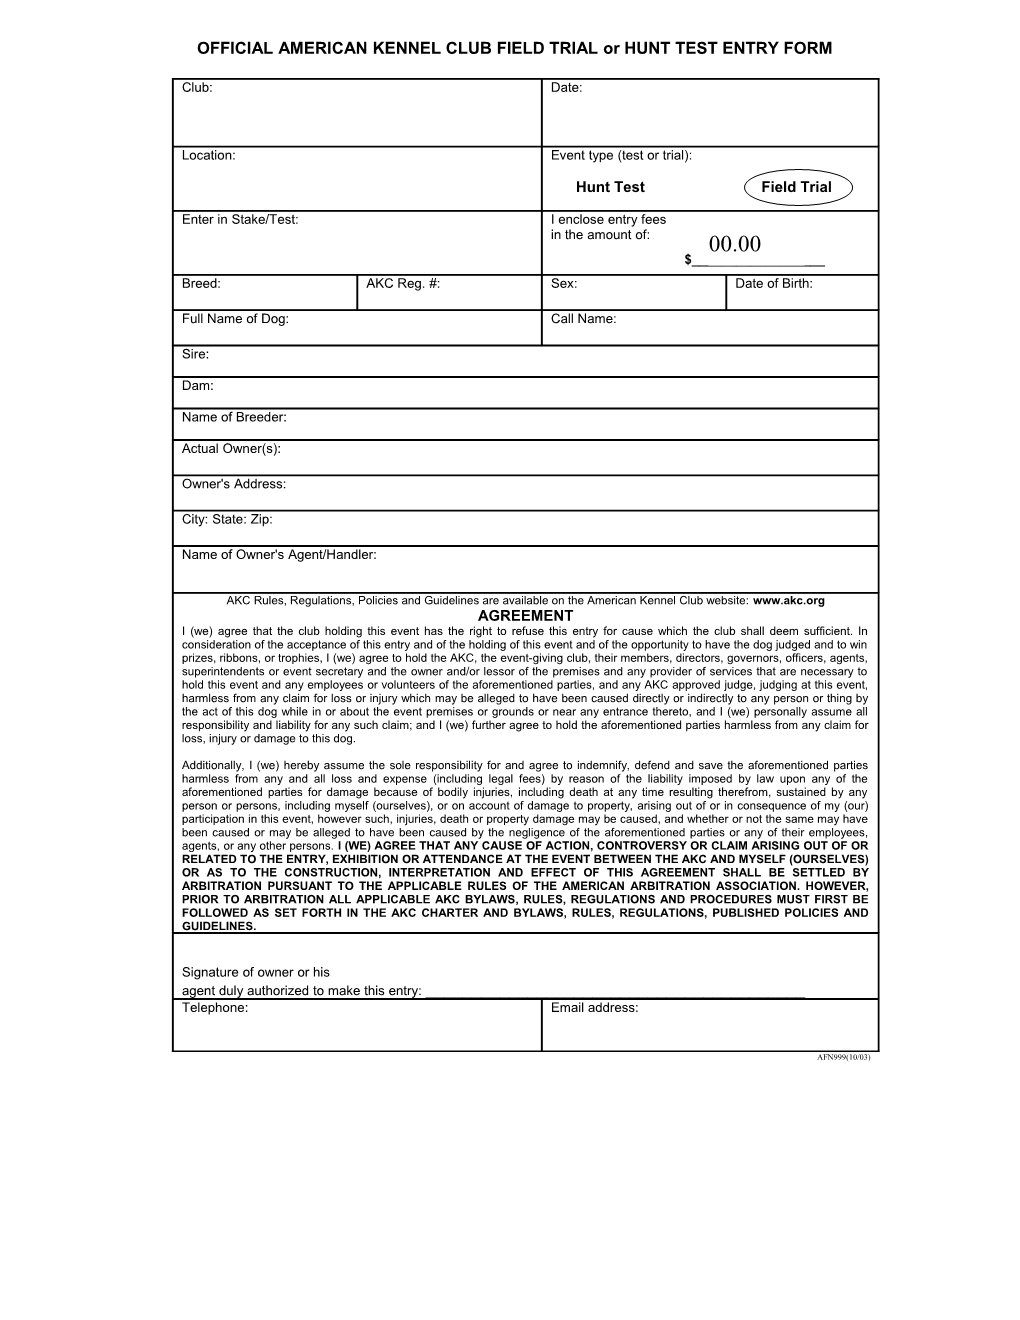 OFFICIAL AMERICAN KENNEL CLUB FIELD TRIAL Or HUNT TEST ENTRY FORM